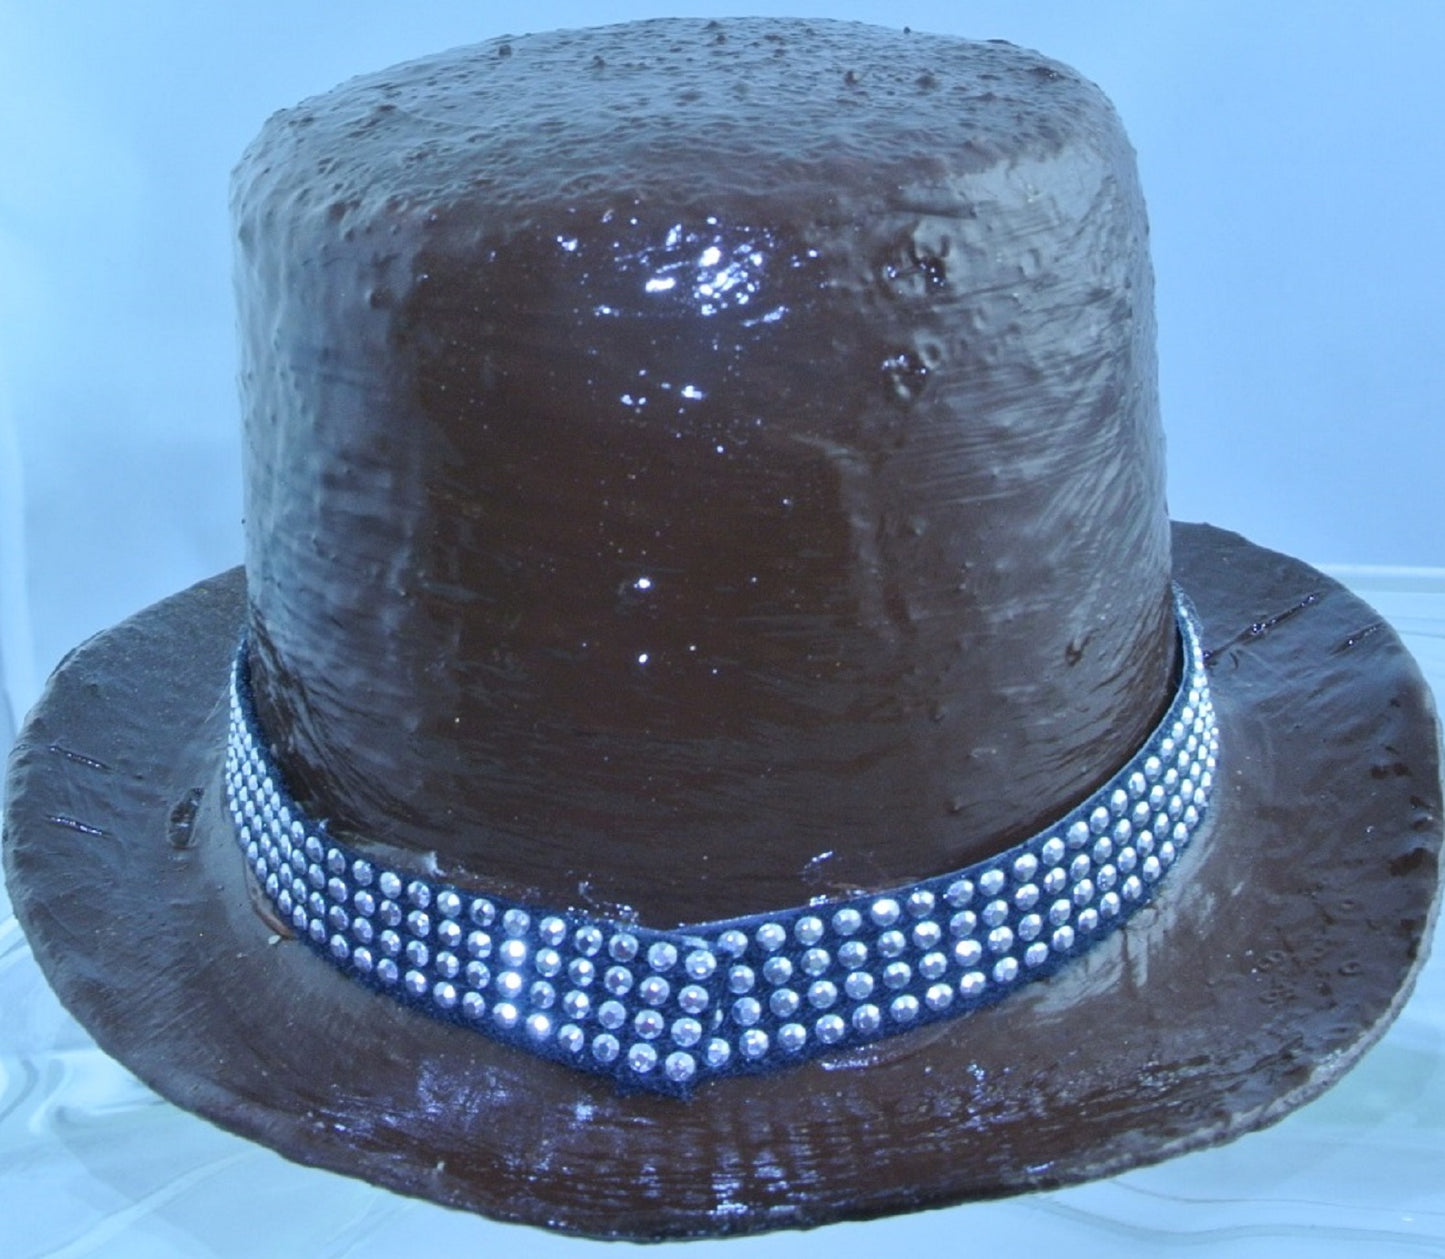 BROWN SILVER DRAGON FRONT BLACK 4 ROW SILVER STUDDED RIBBON BAND SMALL MINI TOP HAT STARR WILDE STEAMPUNK FORTRESS